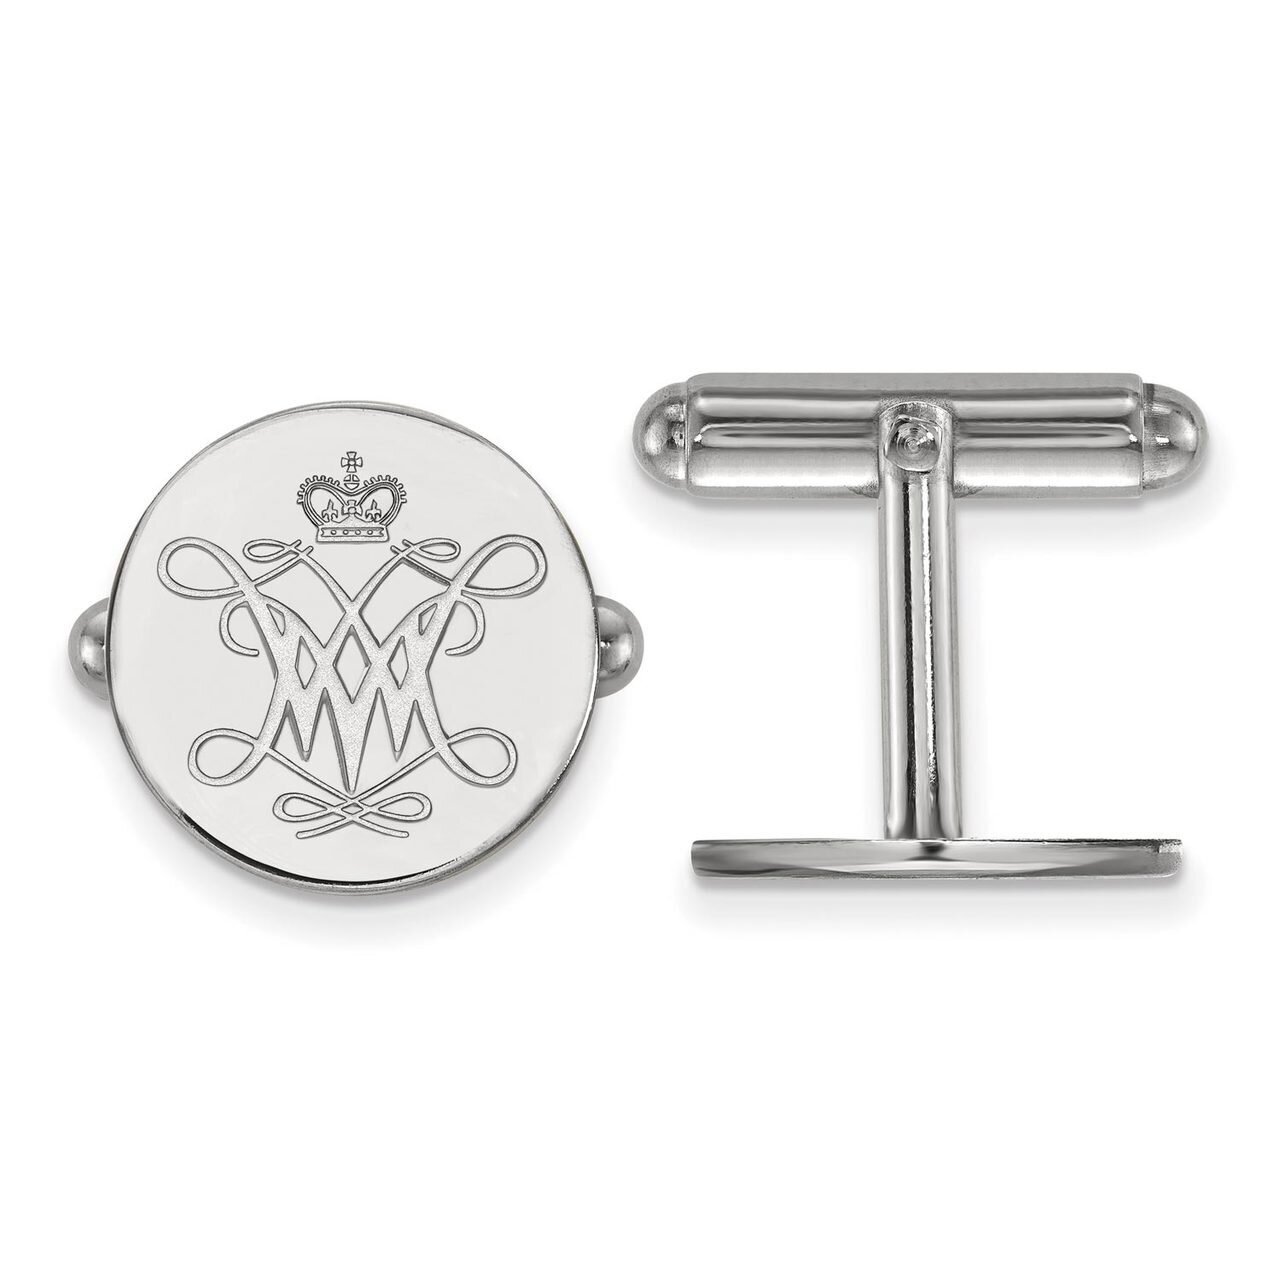 William And Mary Cuff Link Sterling Silver SS002WMA